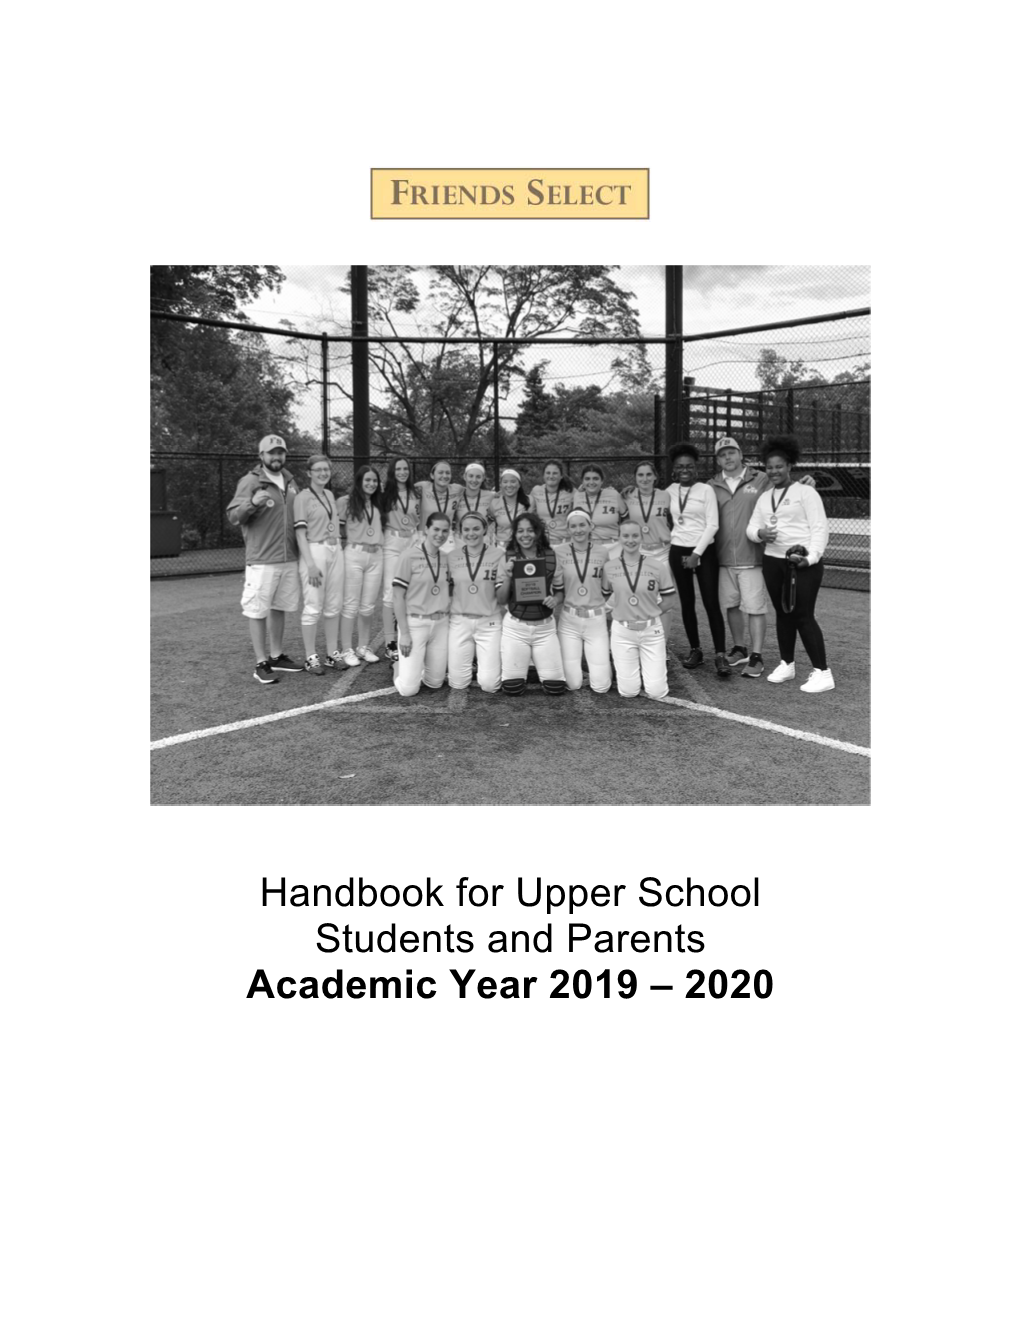 Handbook for Upper School Students and Parents Academic Year 2019 – 2020